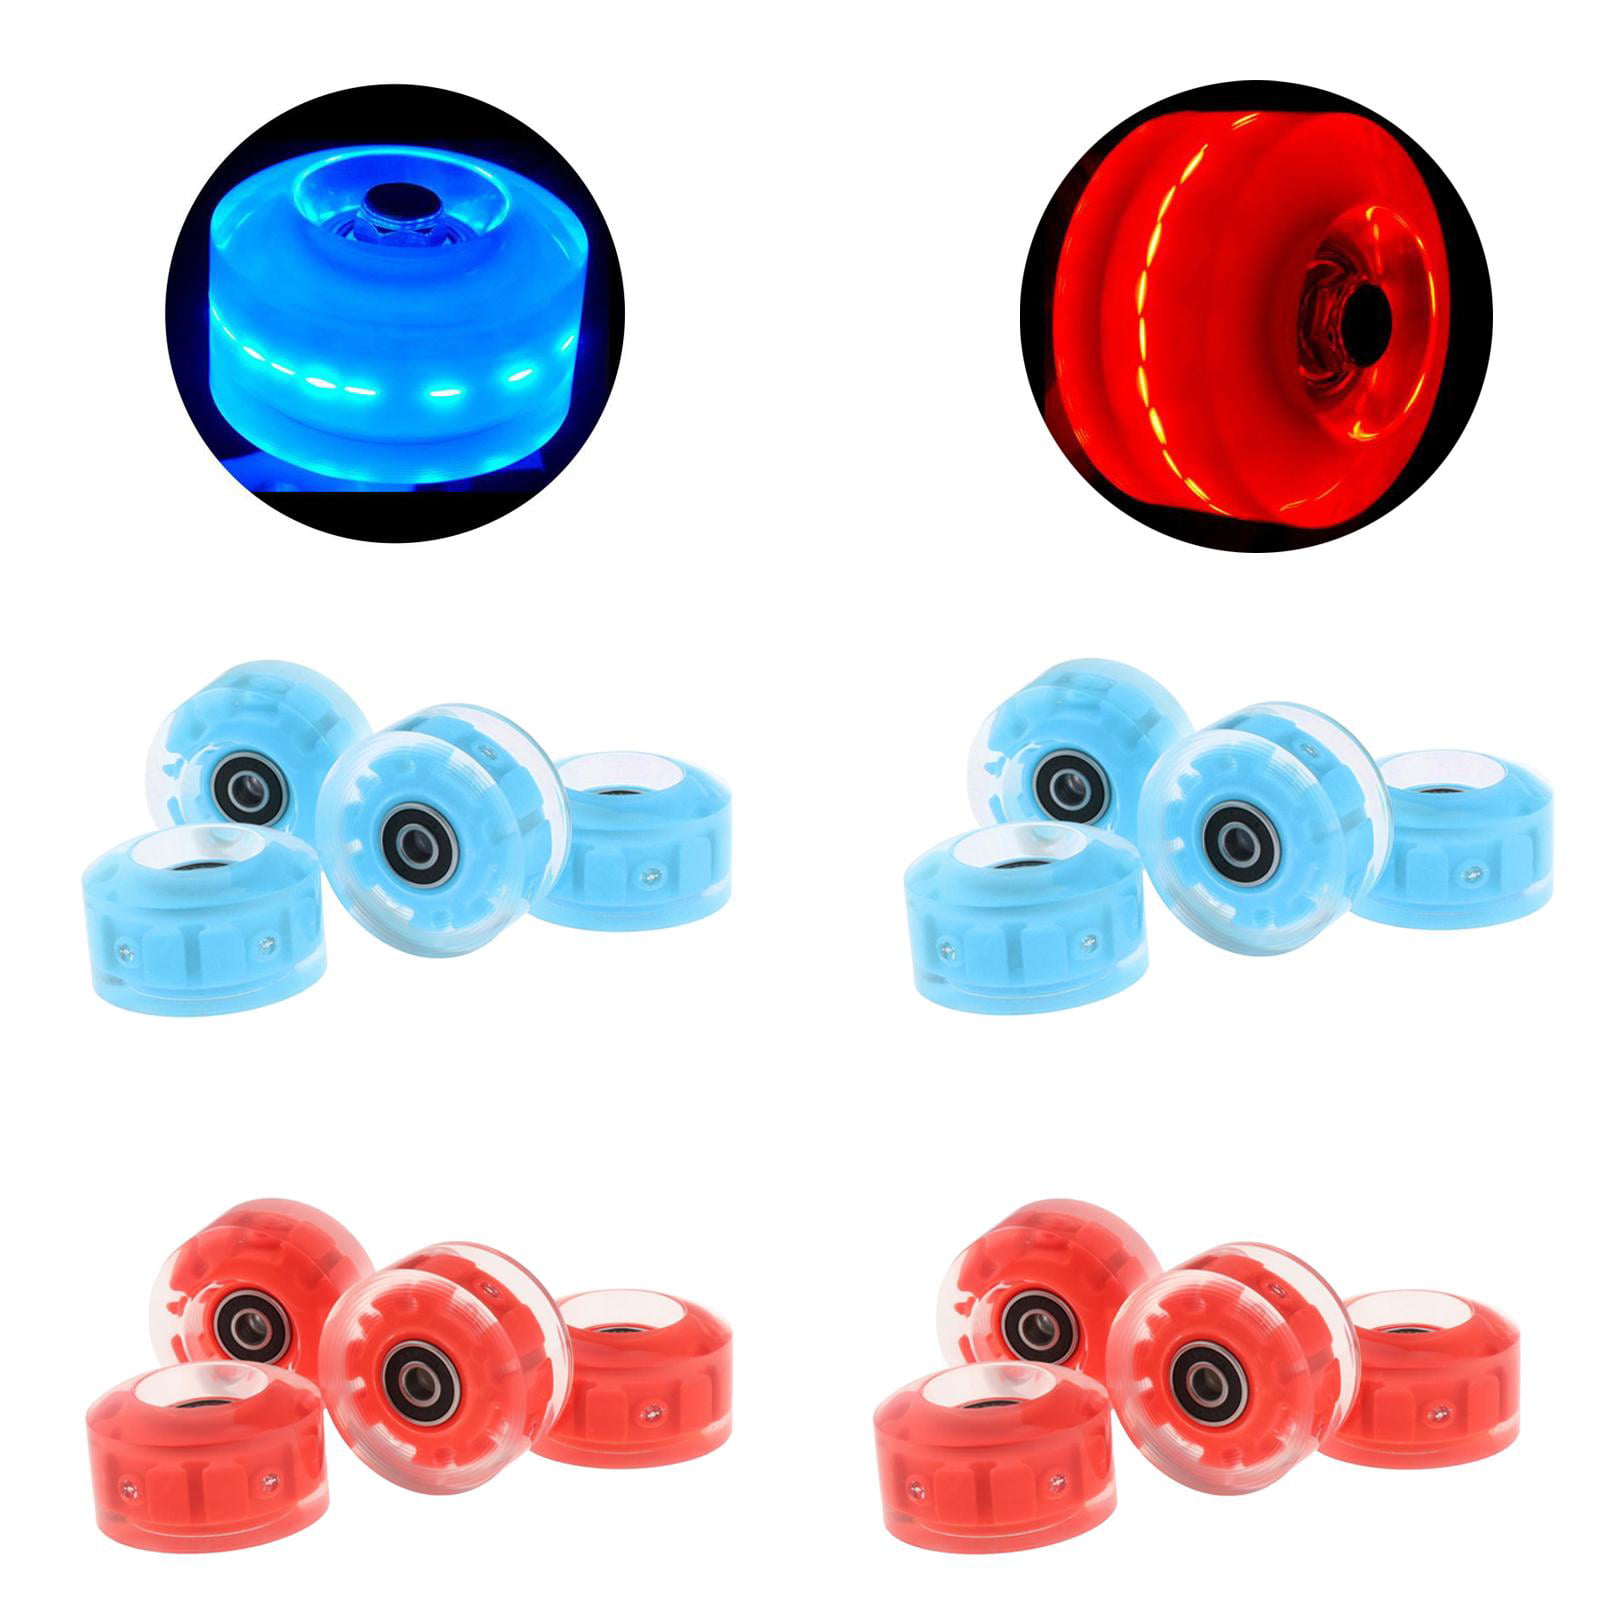 TOBWOLF 8 Pack 82A 58mm x 32mm Quad Roller Skate Wheels Skate Wheels for Indoor Outdoor Double-Row Roller Skating Wear-Resistant PU Wheels Replacements 